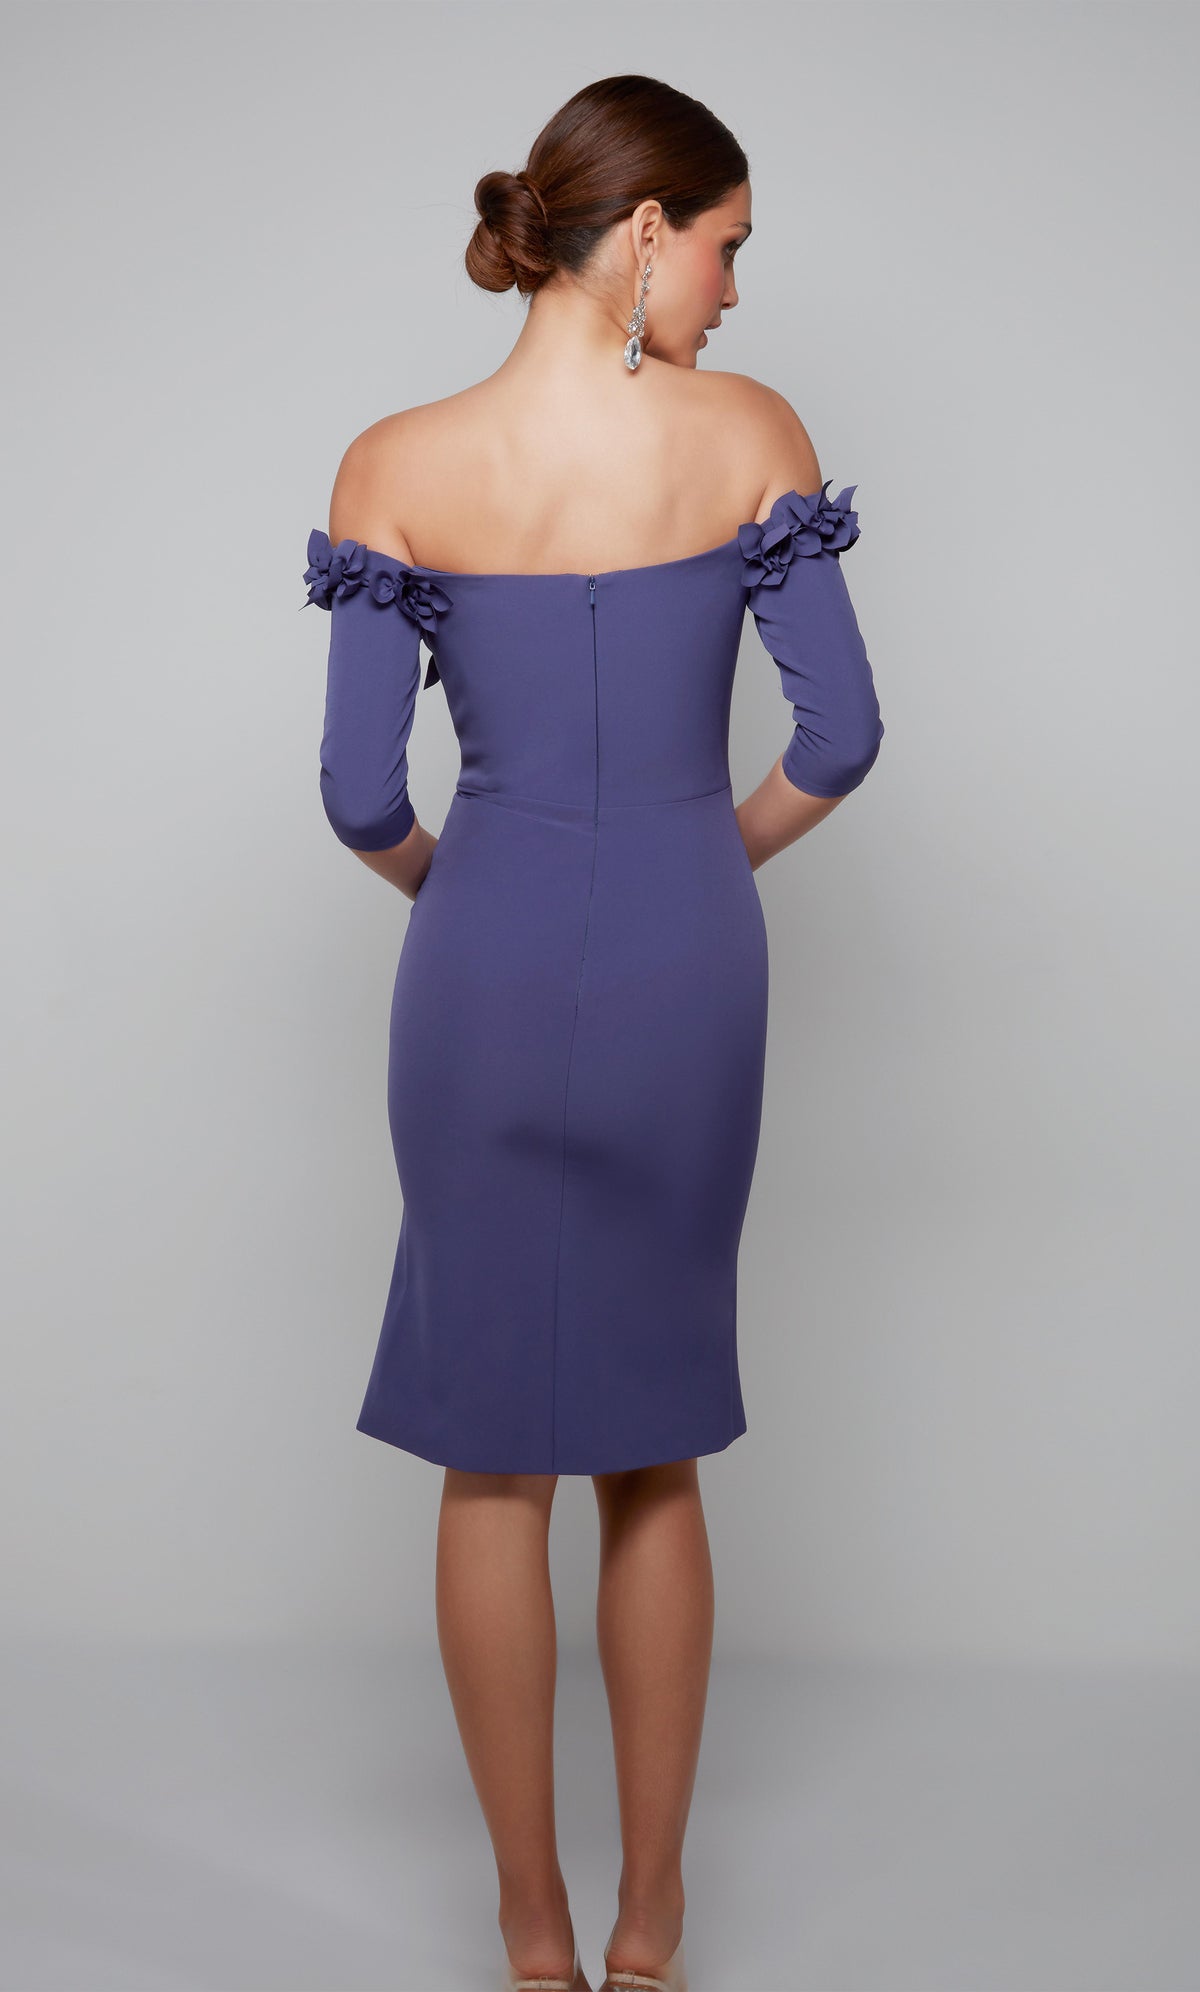 Purple cocktail midi dress with an off the shoulder bodice enhanced with an airy flower volant.